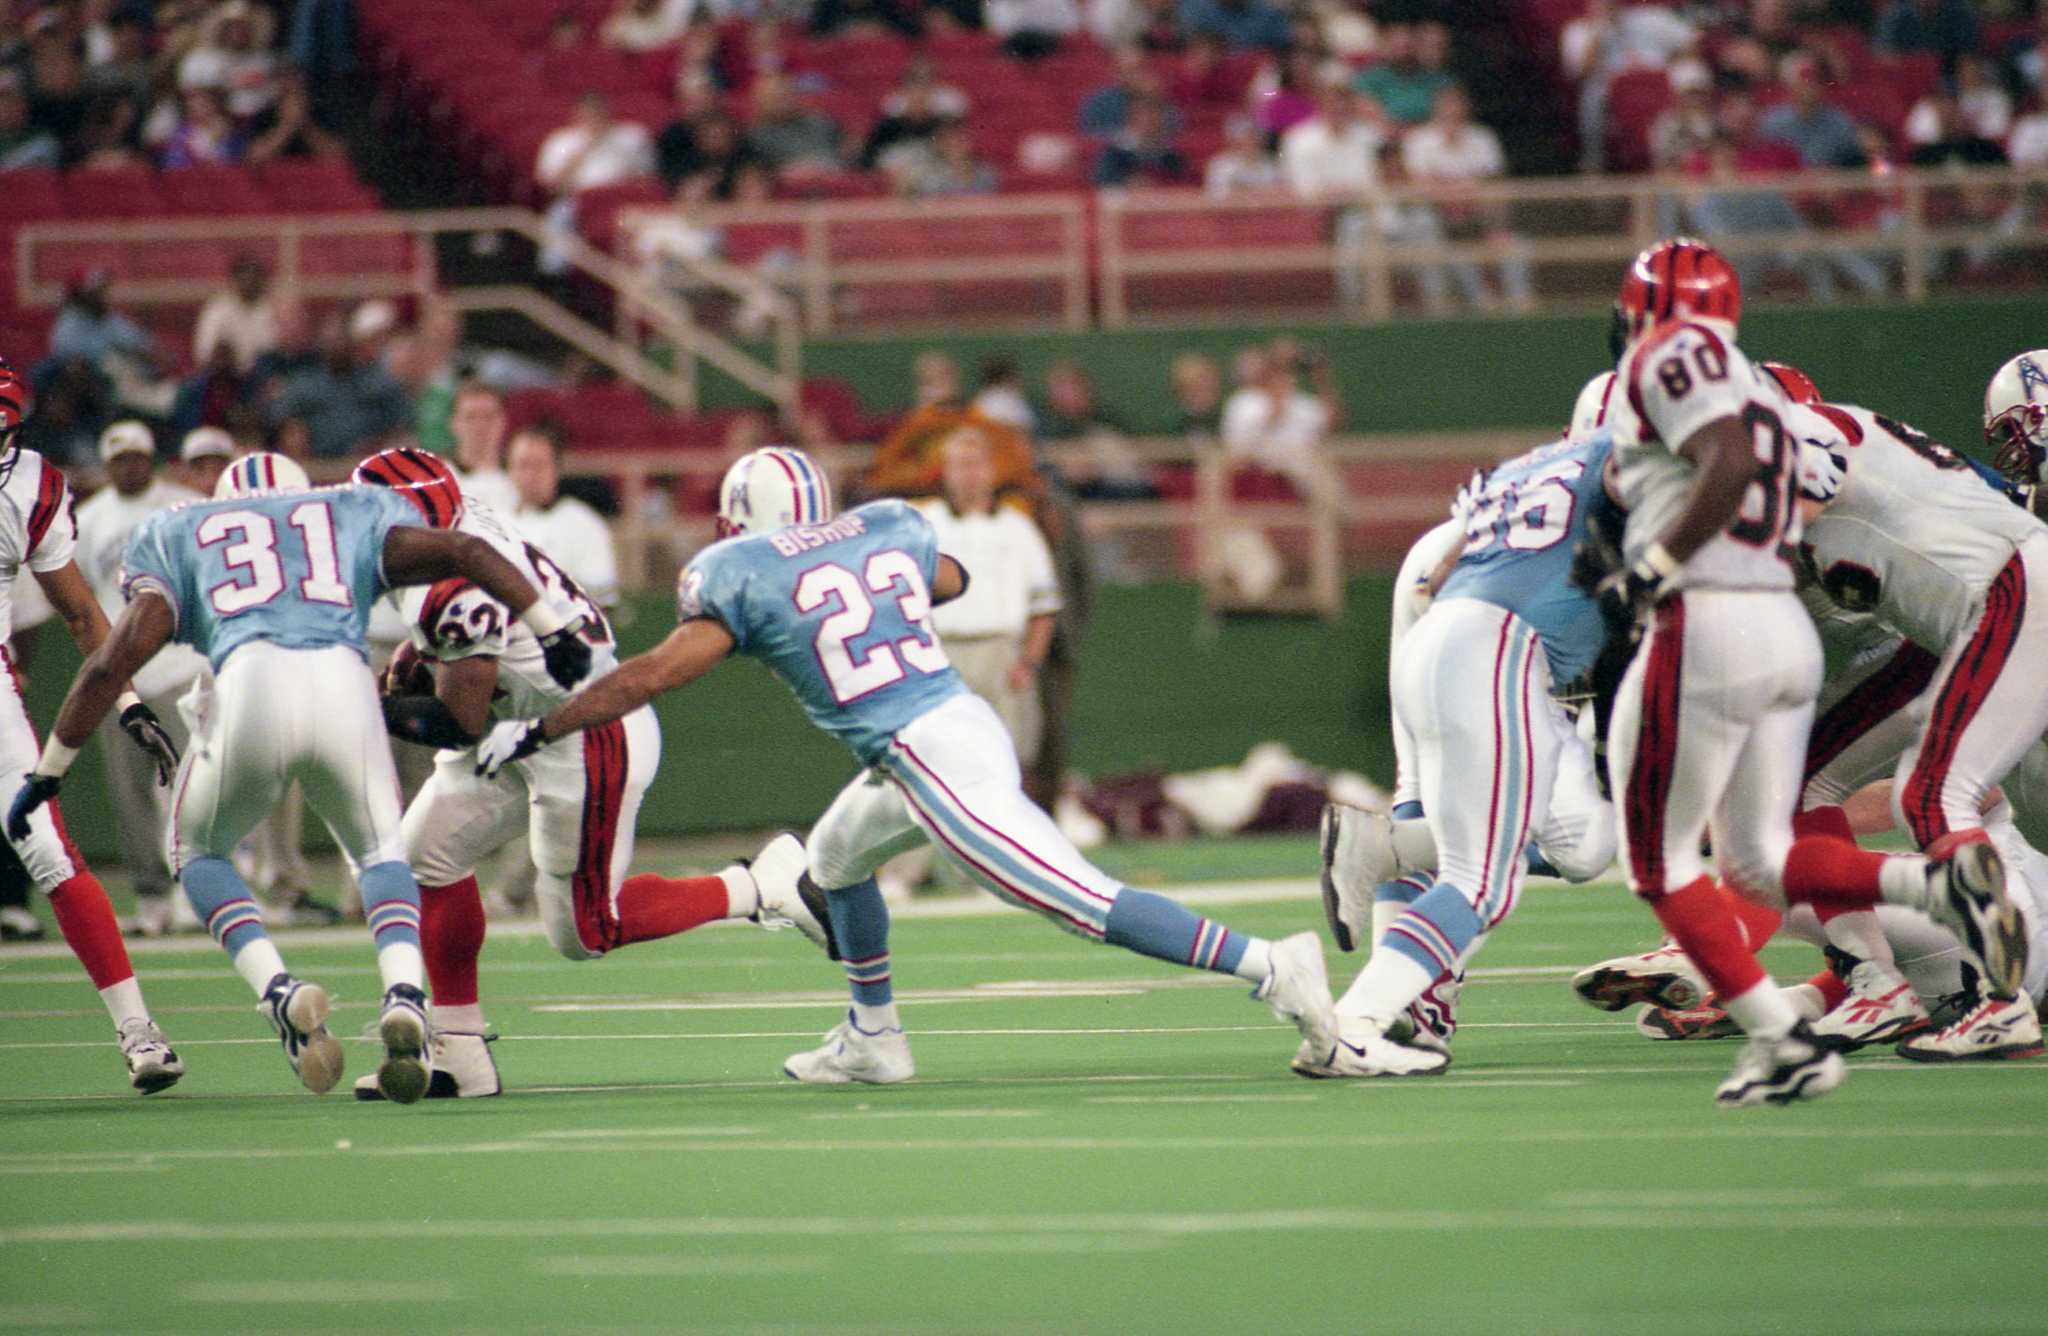 Remember when: Houston Oilers played their last home game at the